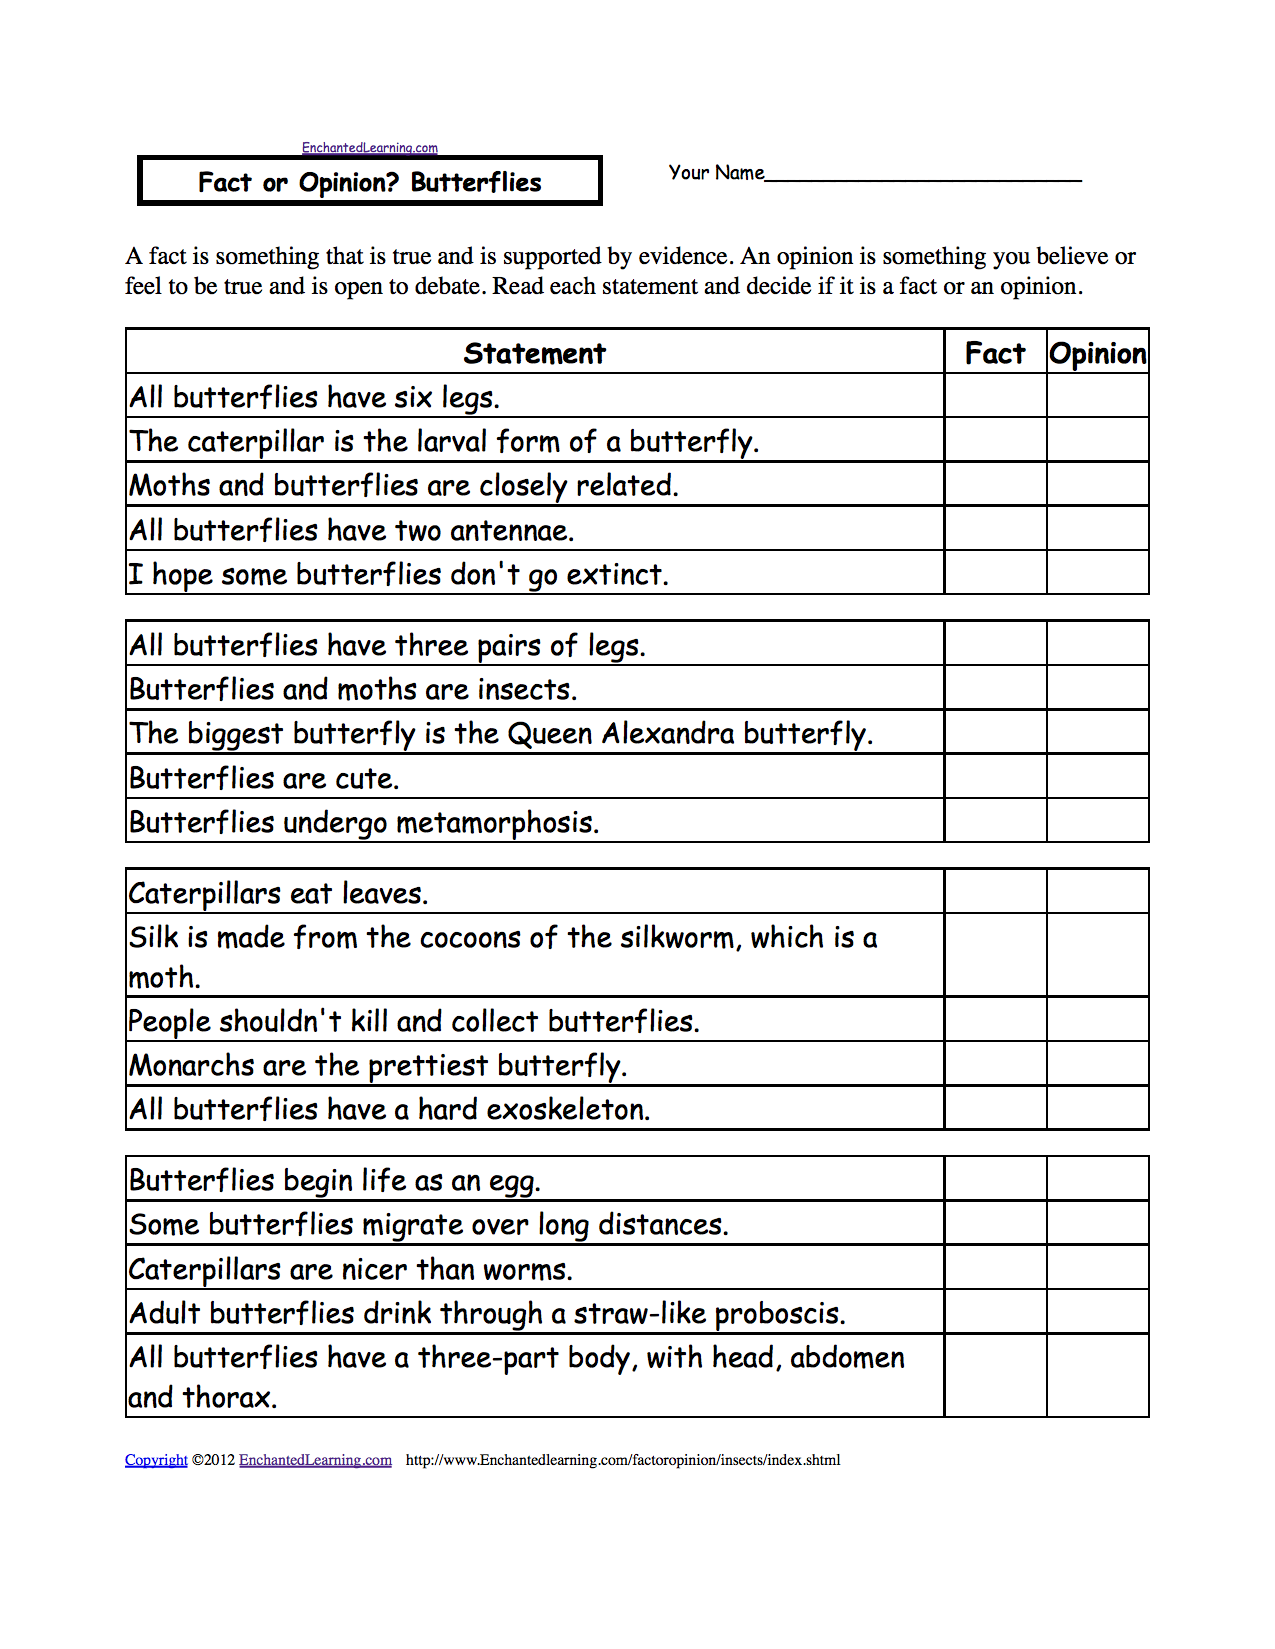 Fact or Opinion? Checkmark Worksheets to Print - EnchantedLearning.com With Fact Or Opinion Worksheet